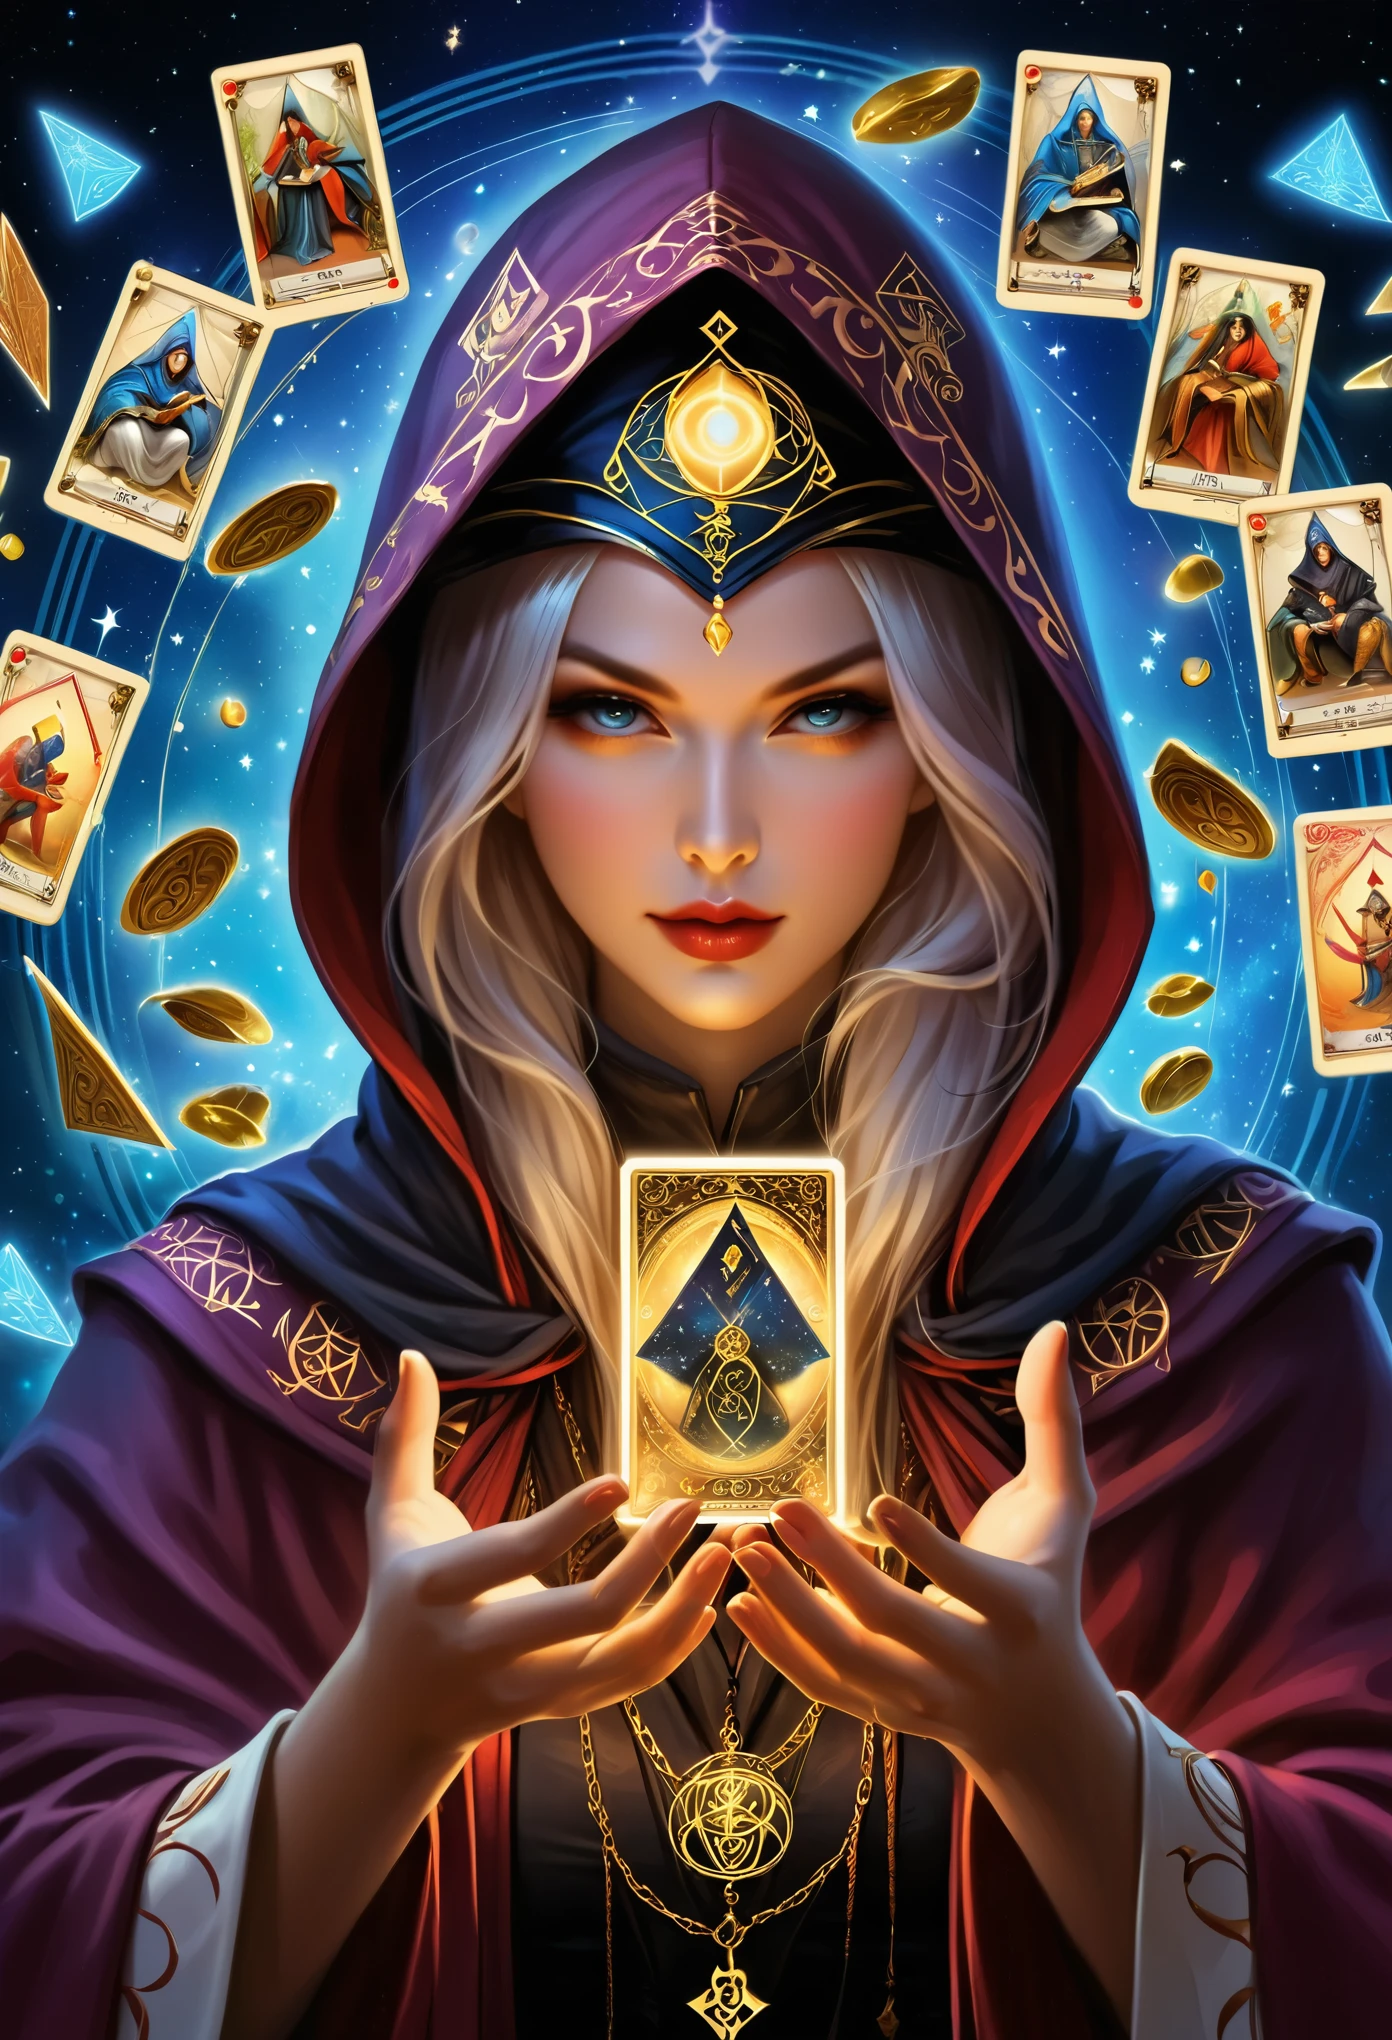 Onmyoji，Metal photo frame，card，tarot cards：1.37.Mysterious fortune teller wearing hood，Finger taps an array of tarot cards in the air，Mystical symbols and elements，ancient mysterious atmosphere，Realistic illustrationeticulous details，Vibrant and energetic composition，dark style，gothic style